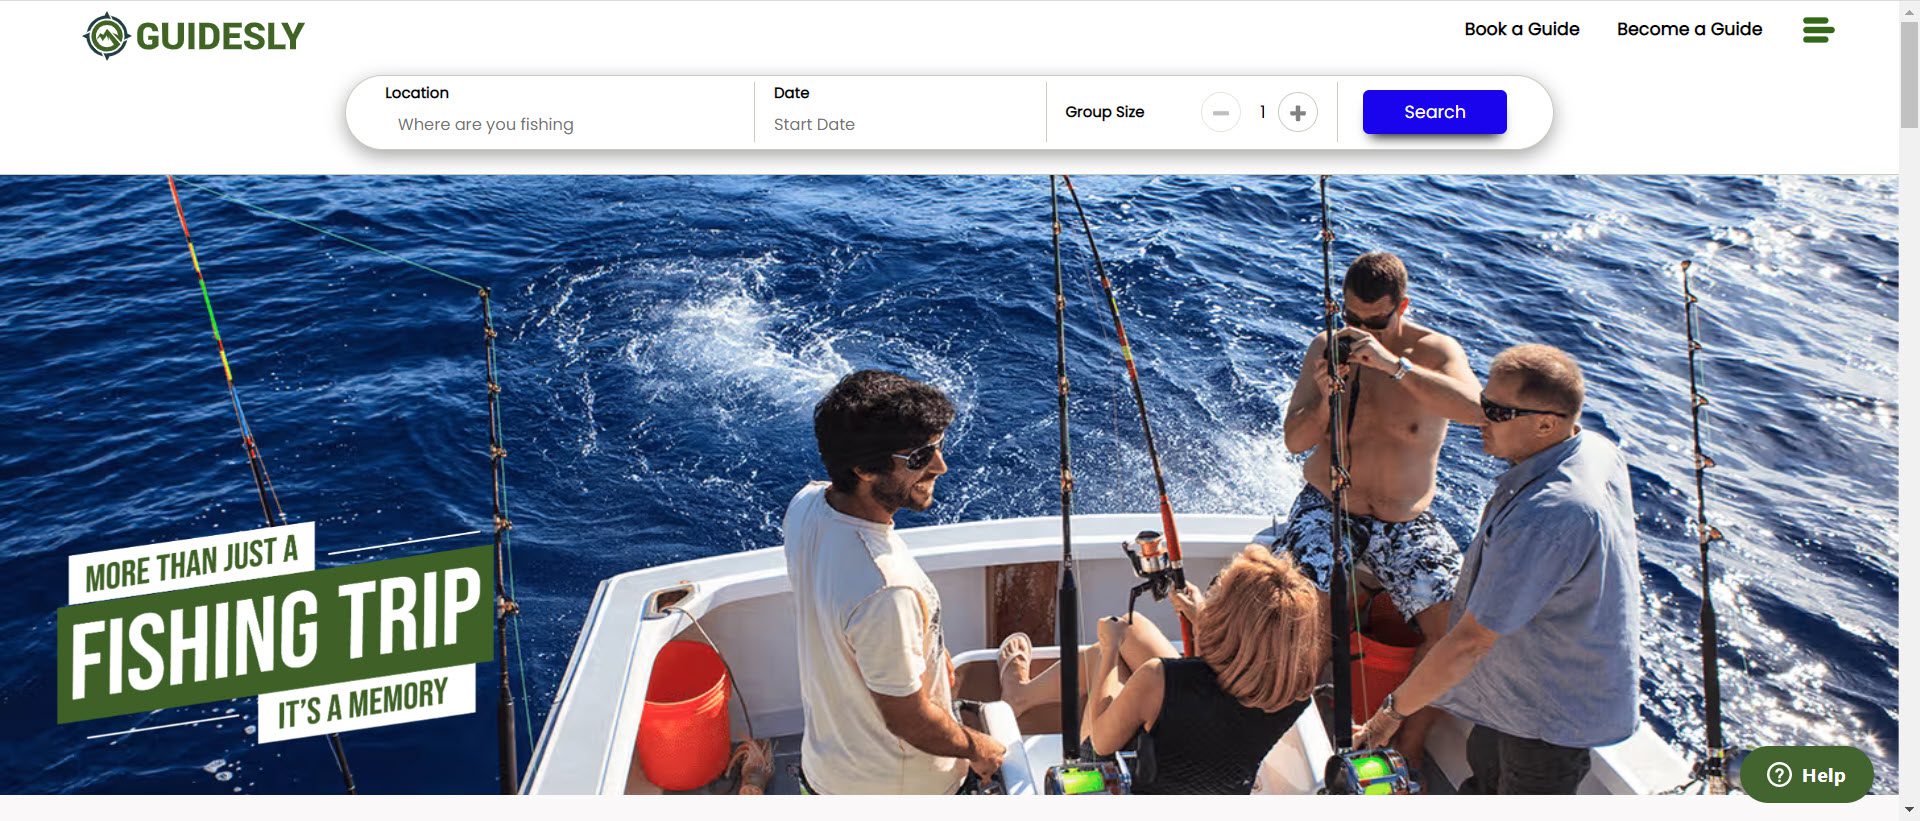 best fishing charters - Guidesly